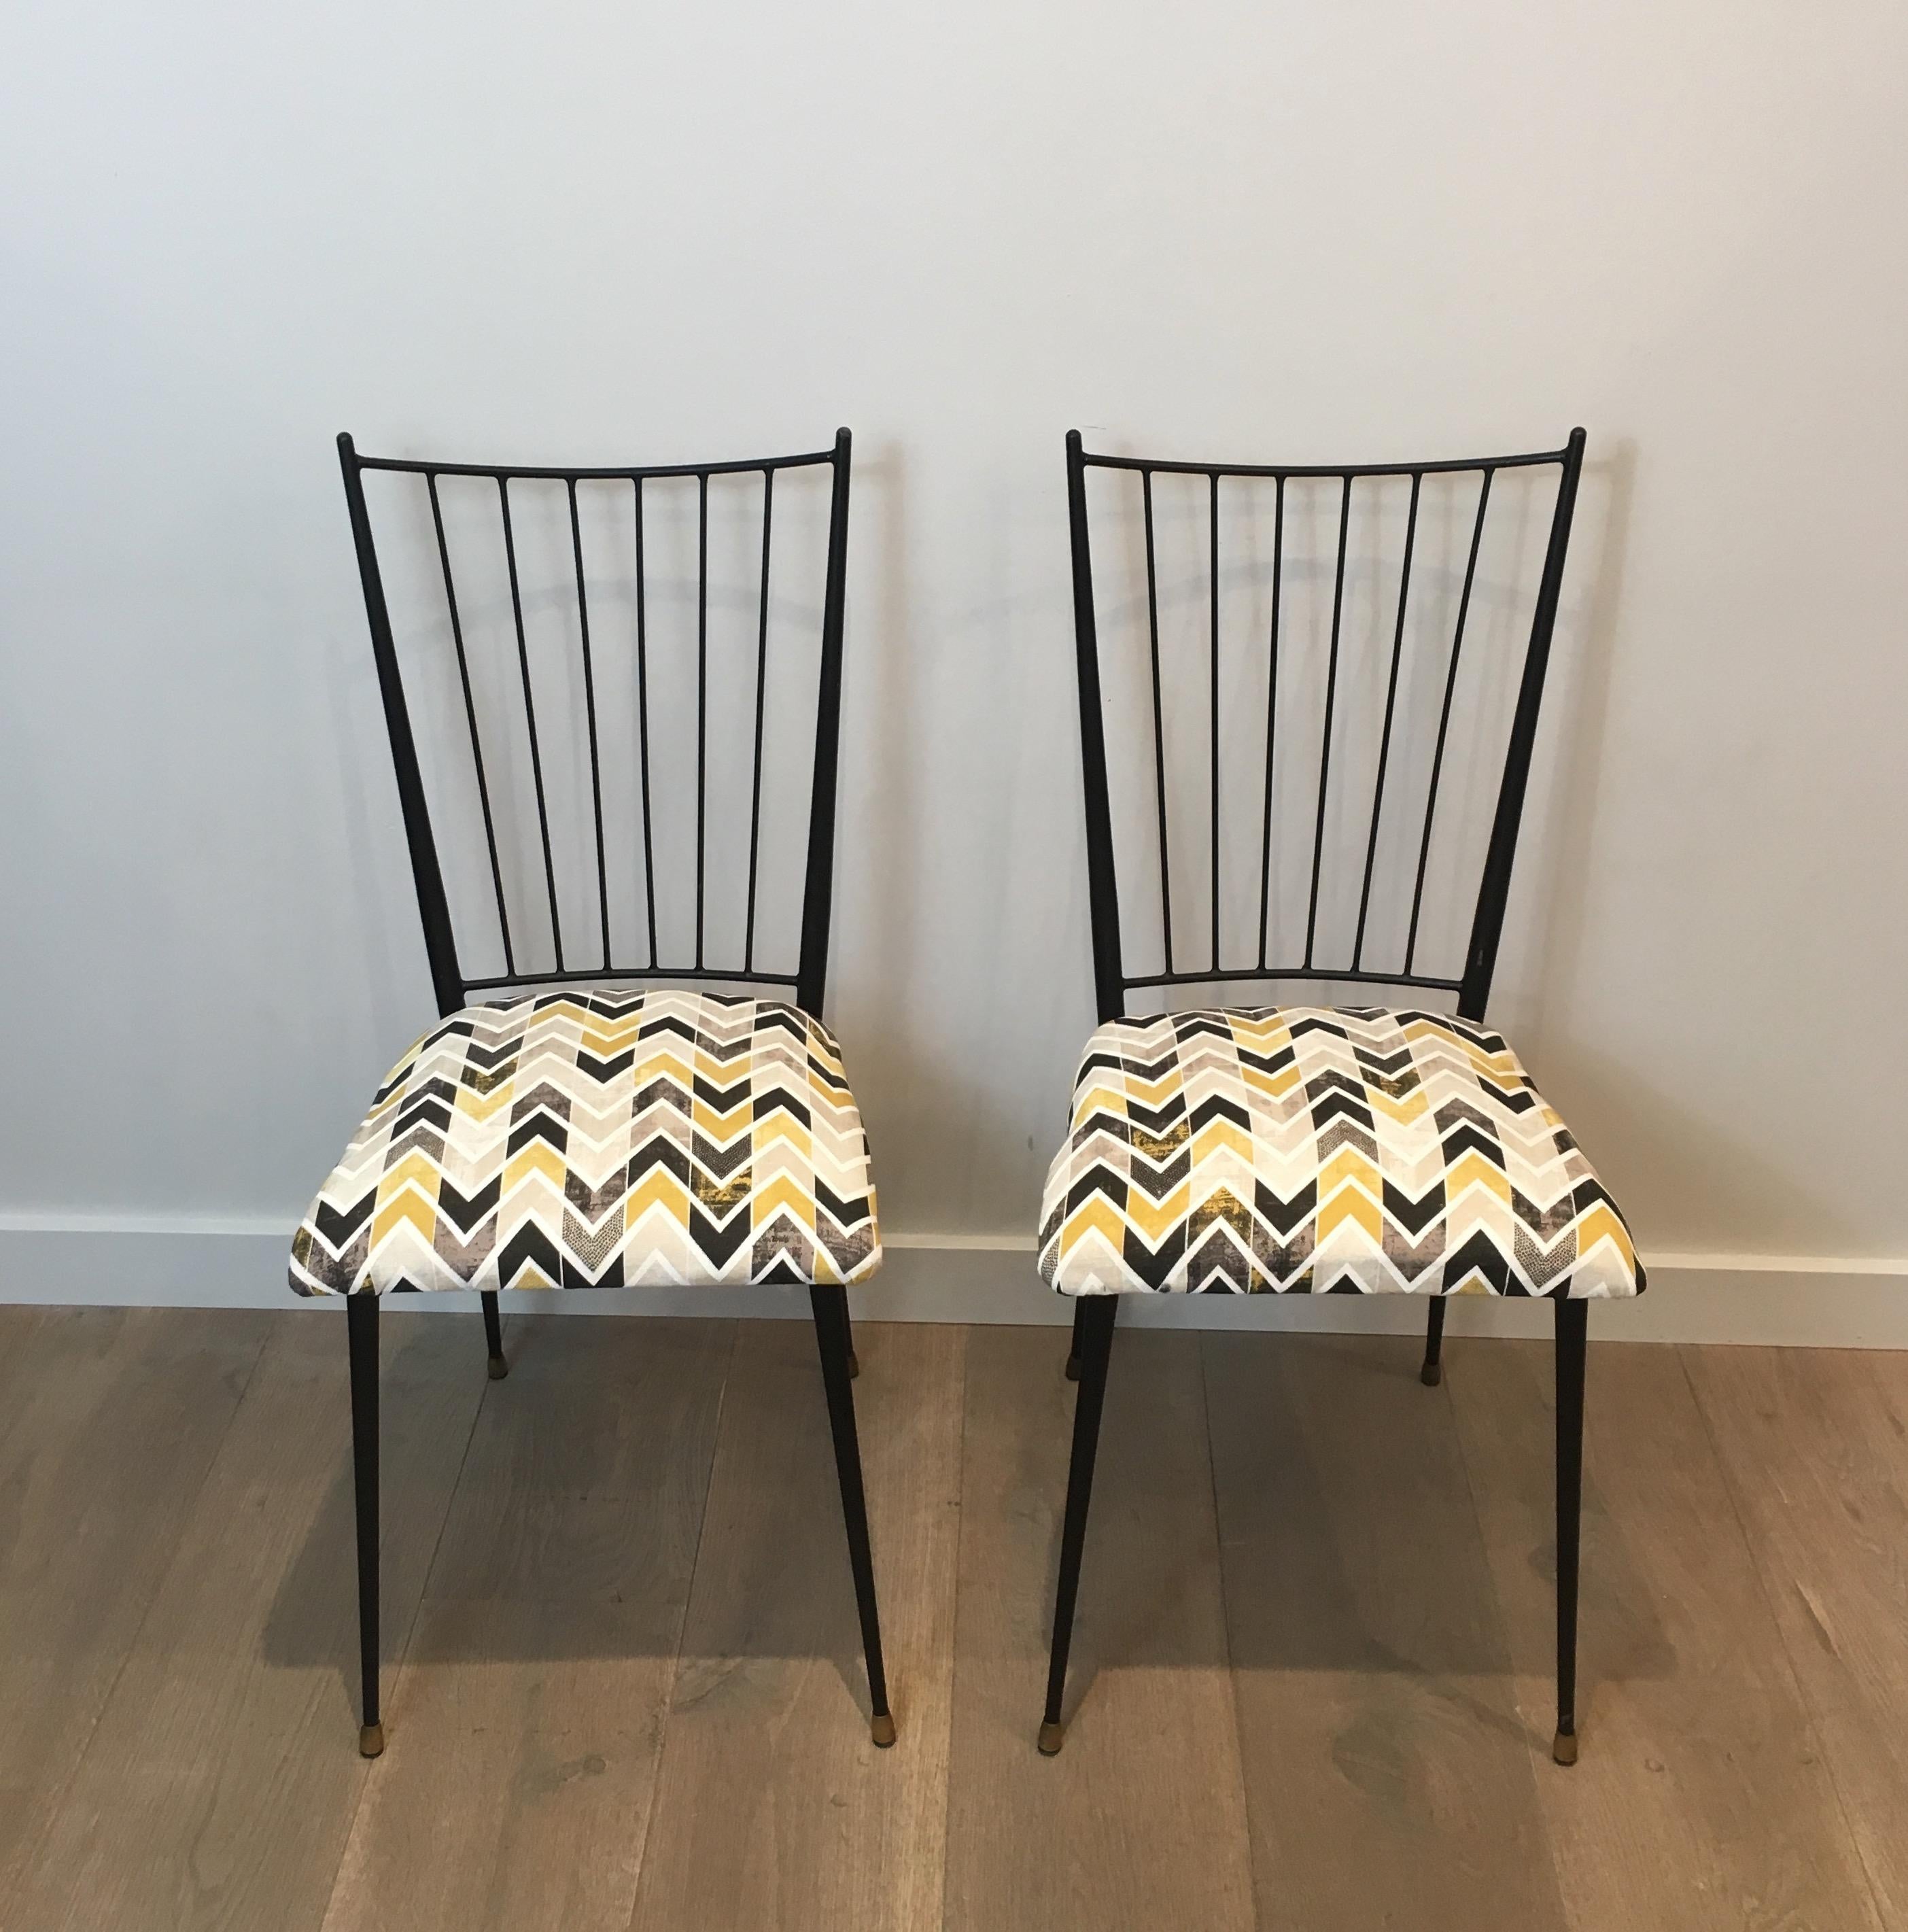 This nice pair of design chairs is made of a black lacquered metal with a nice fabric on the seat. This is a model by famous French designer Colette Gueden, circa 1950.